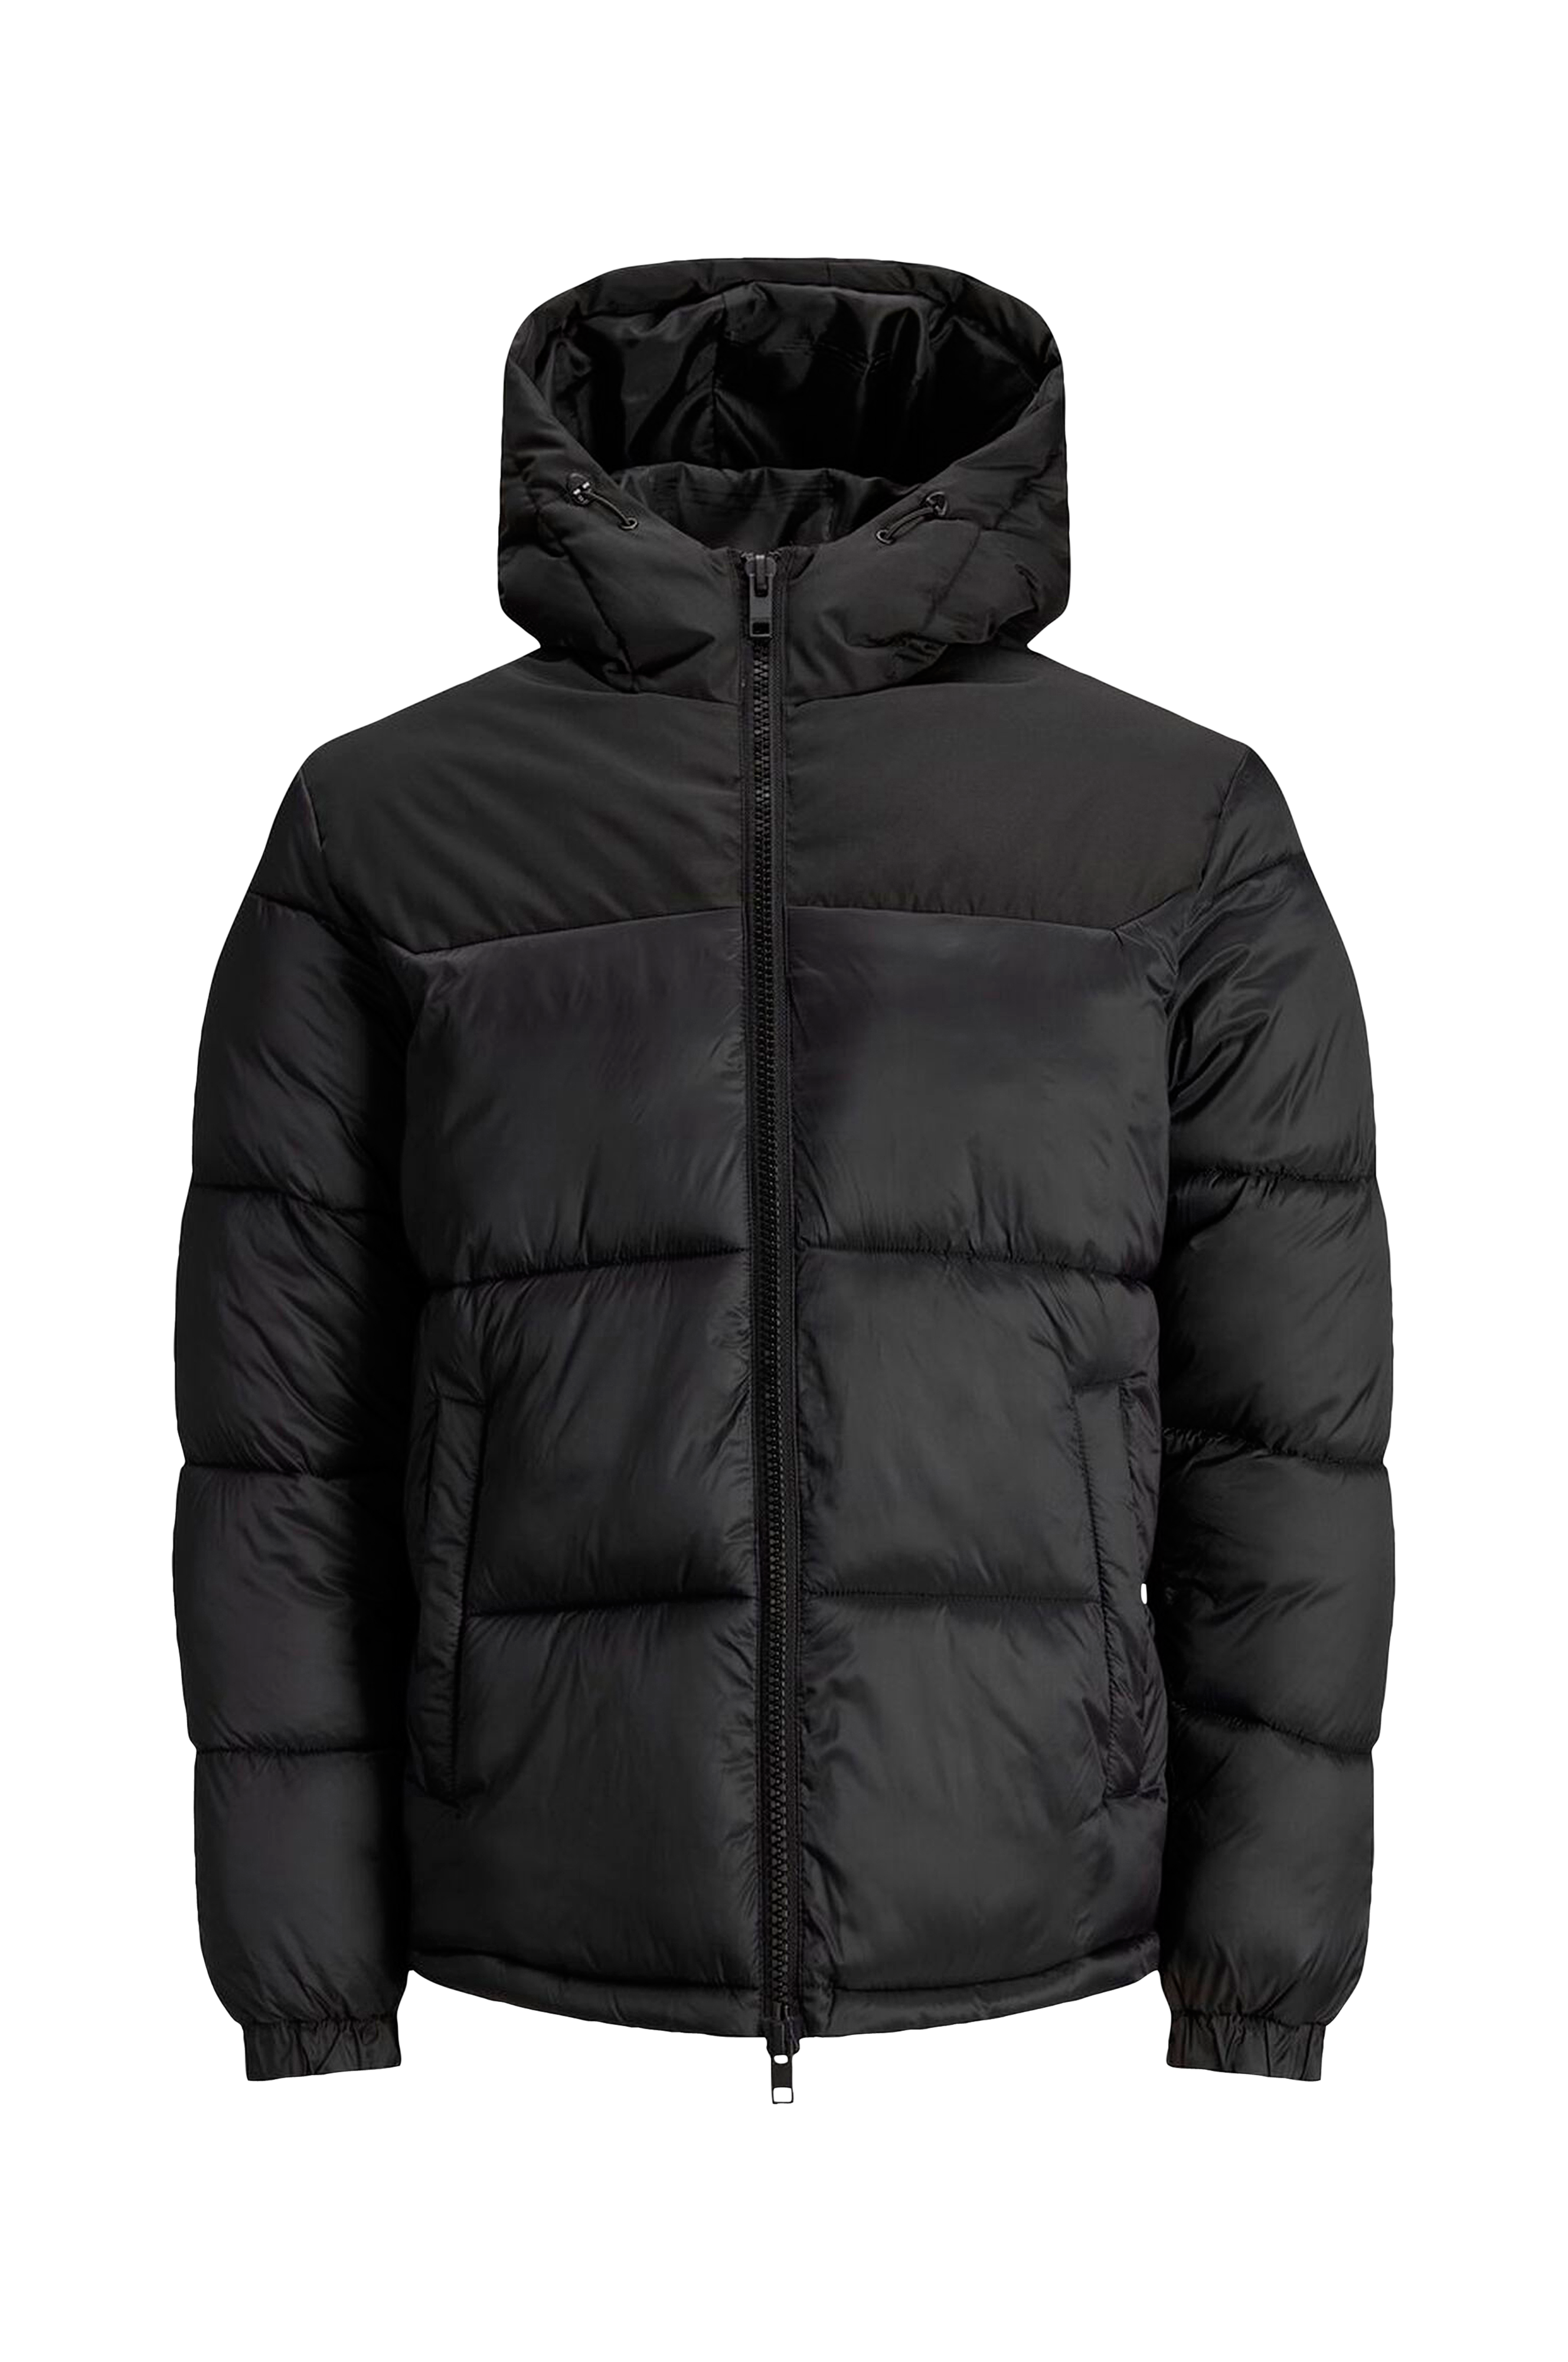 Puffer Jacket Template Png